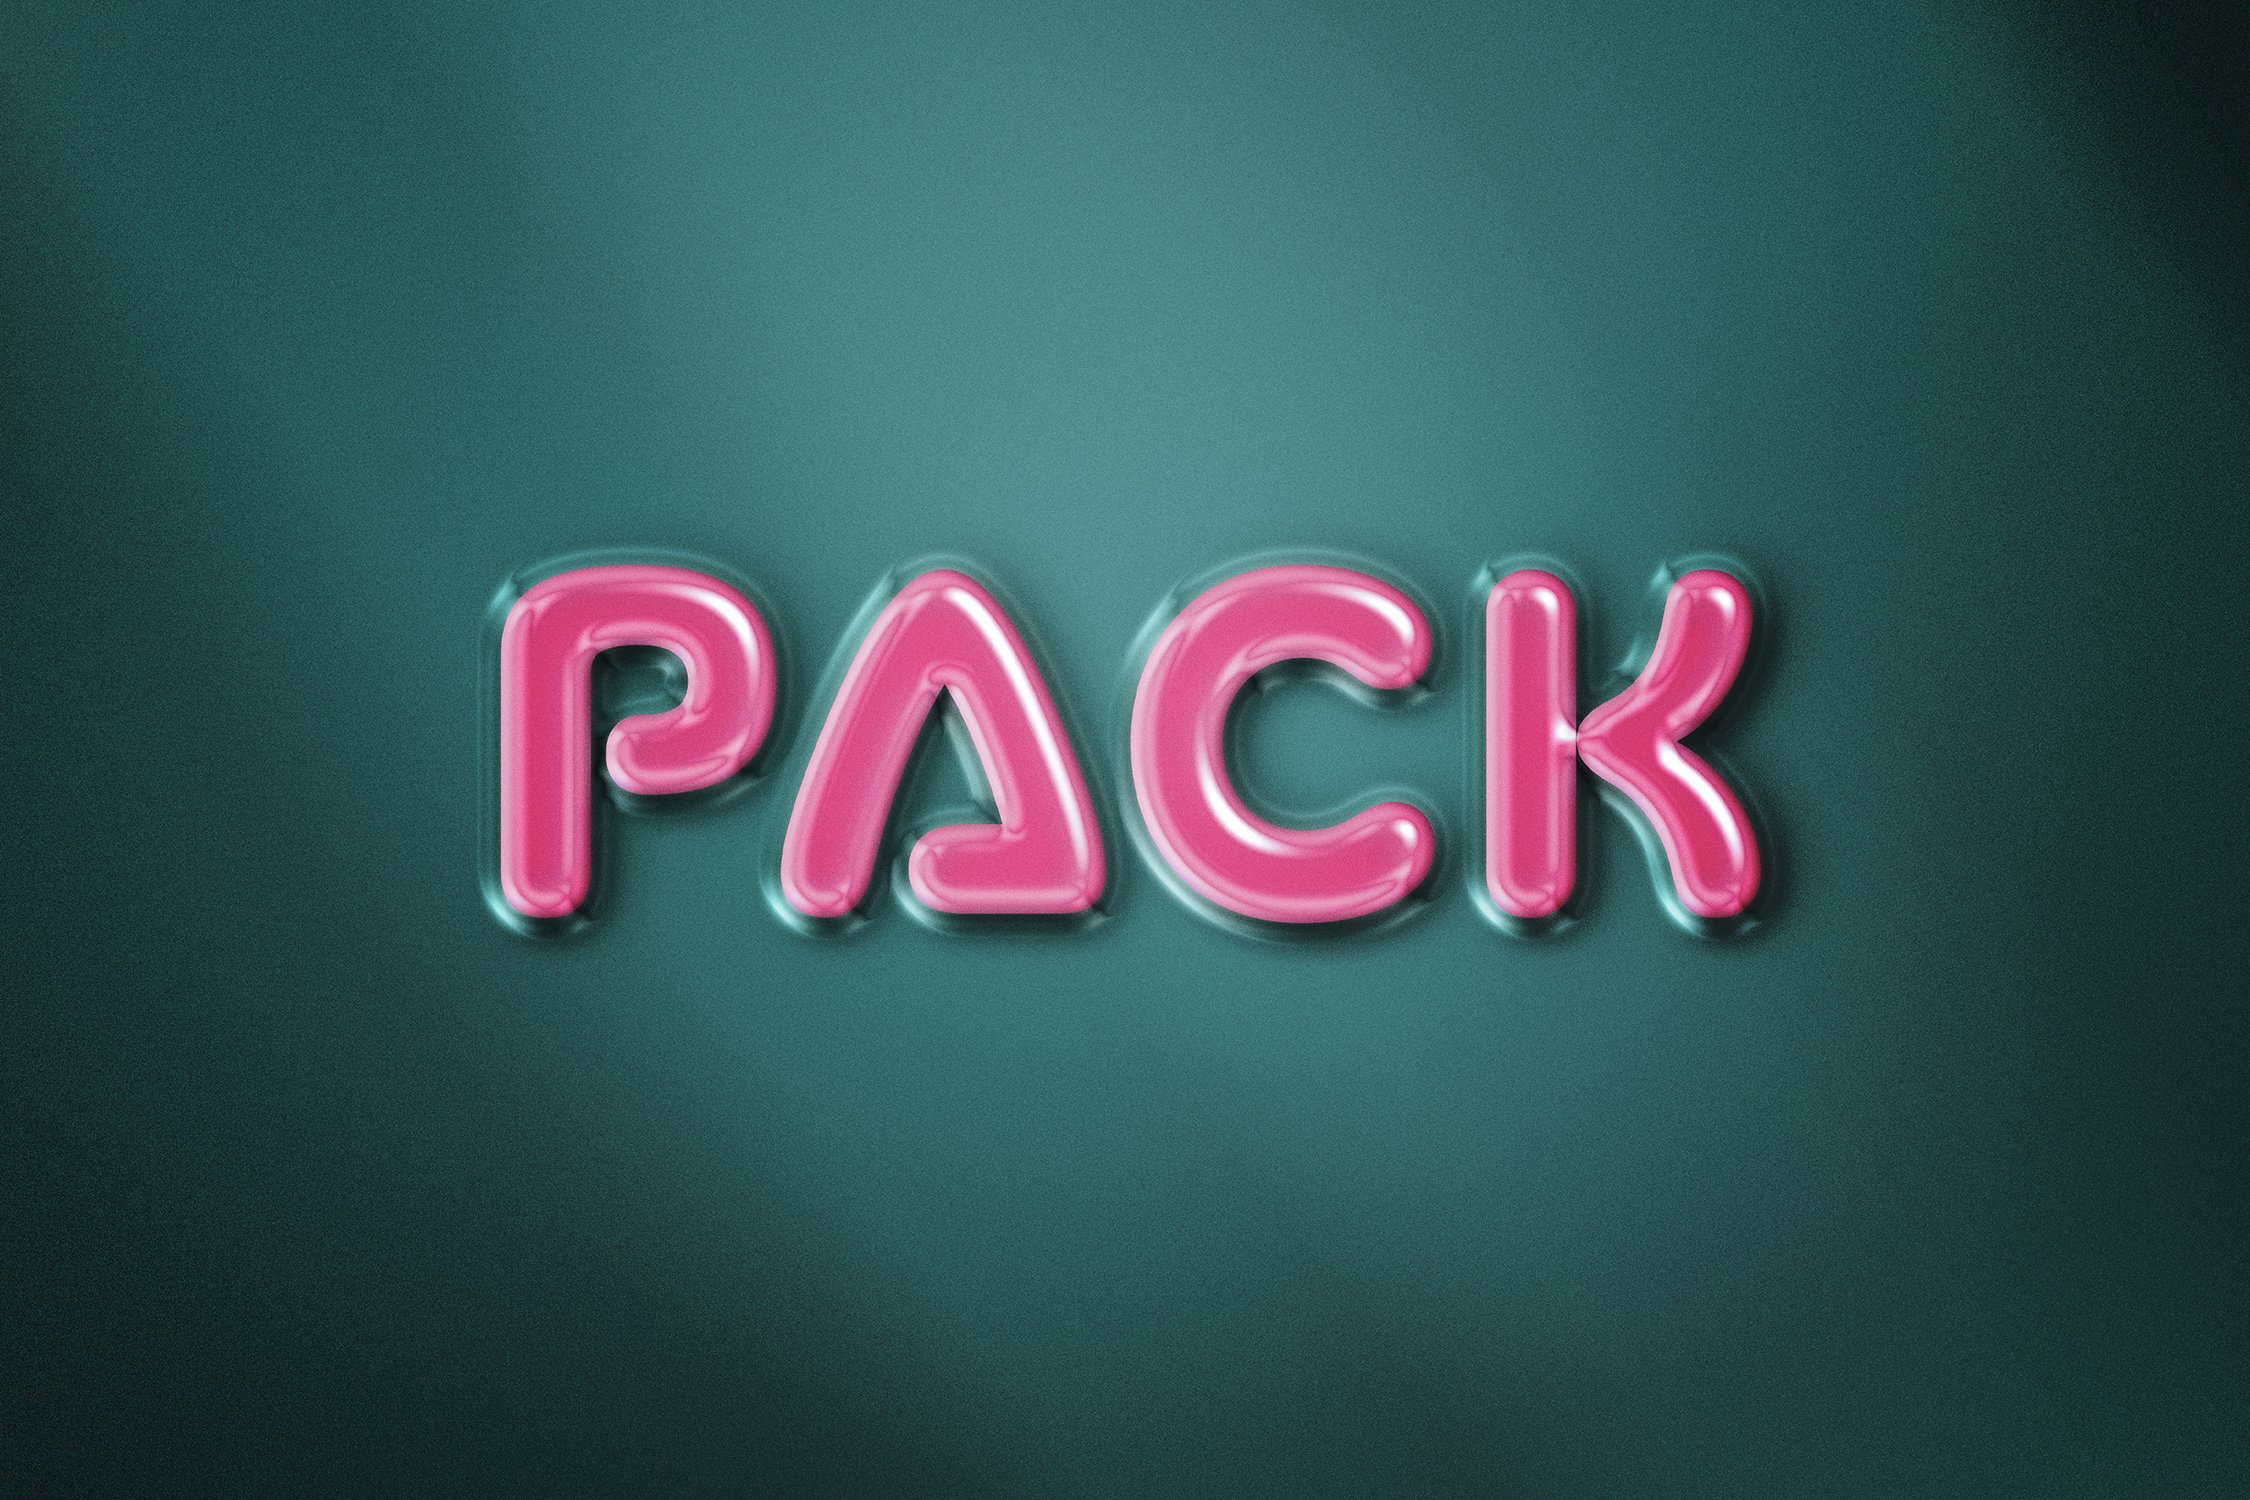 blister pack text effect 03 140